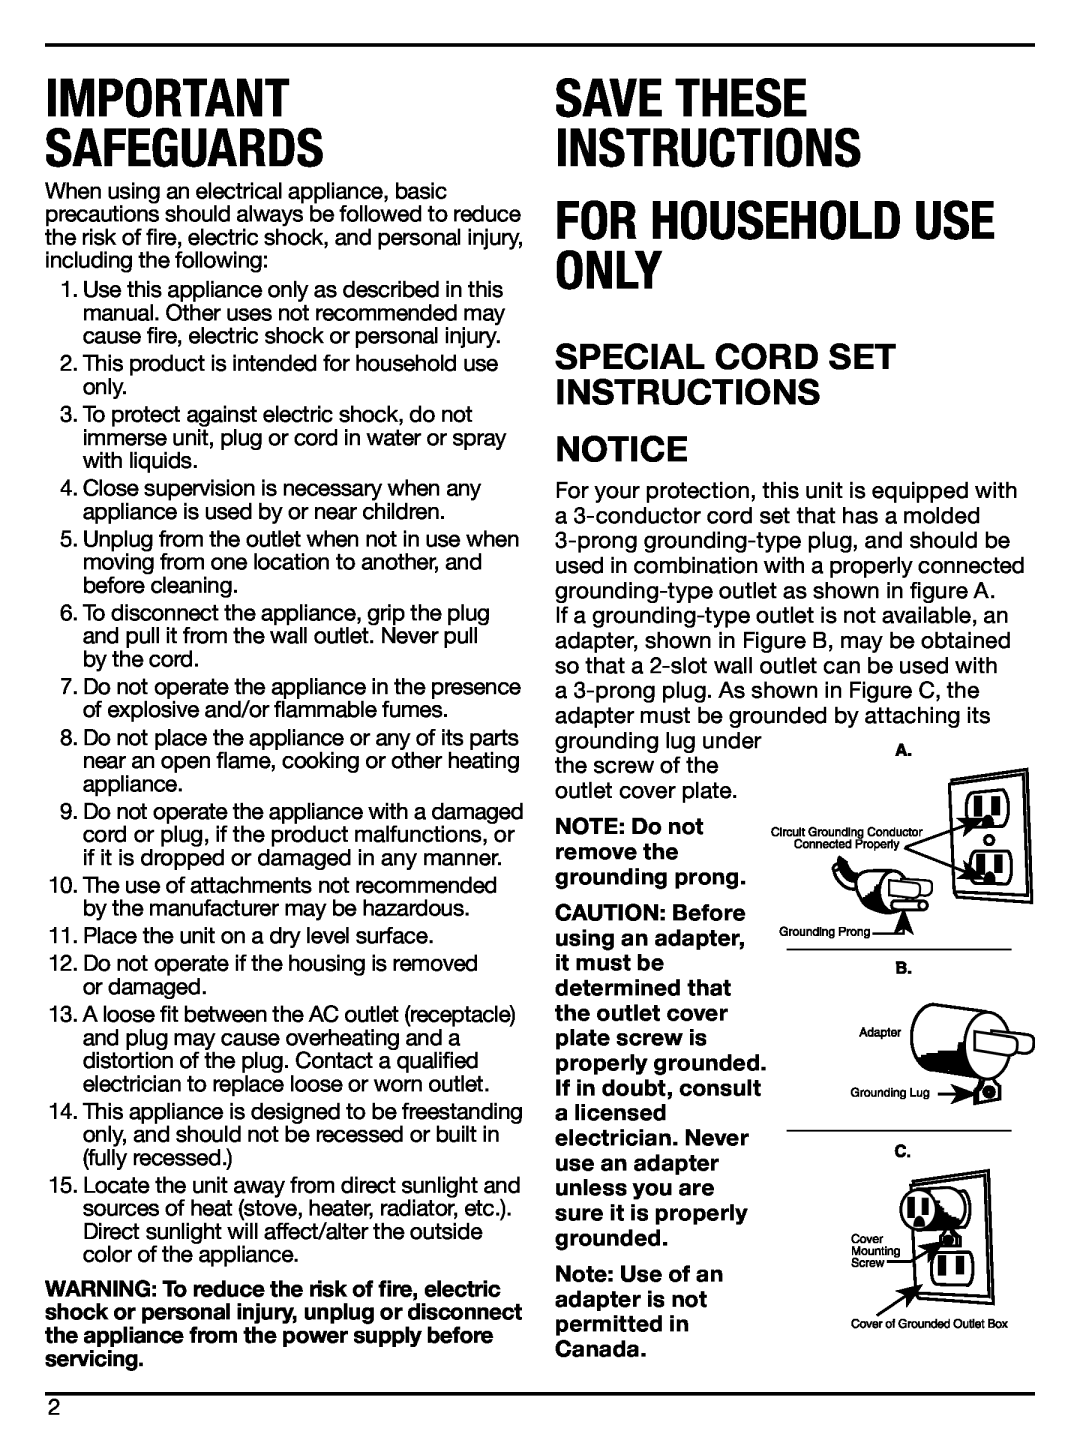 Cuisinart CWC-600 manual Special Cord Set Instructions, Safeguards, For Household Use Only, Save These Instructions 